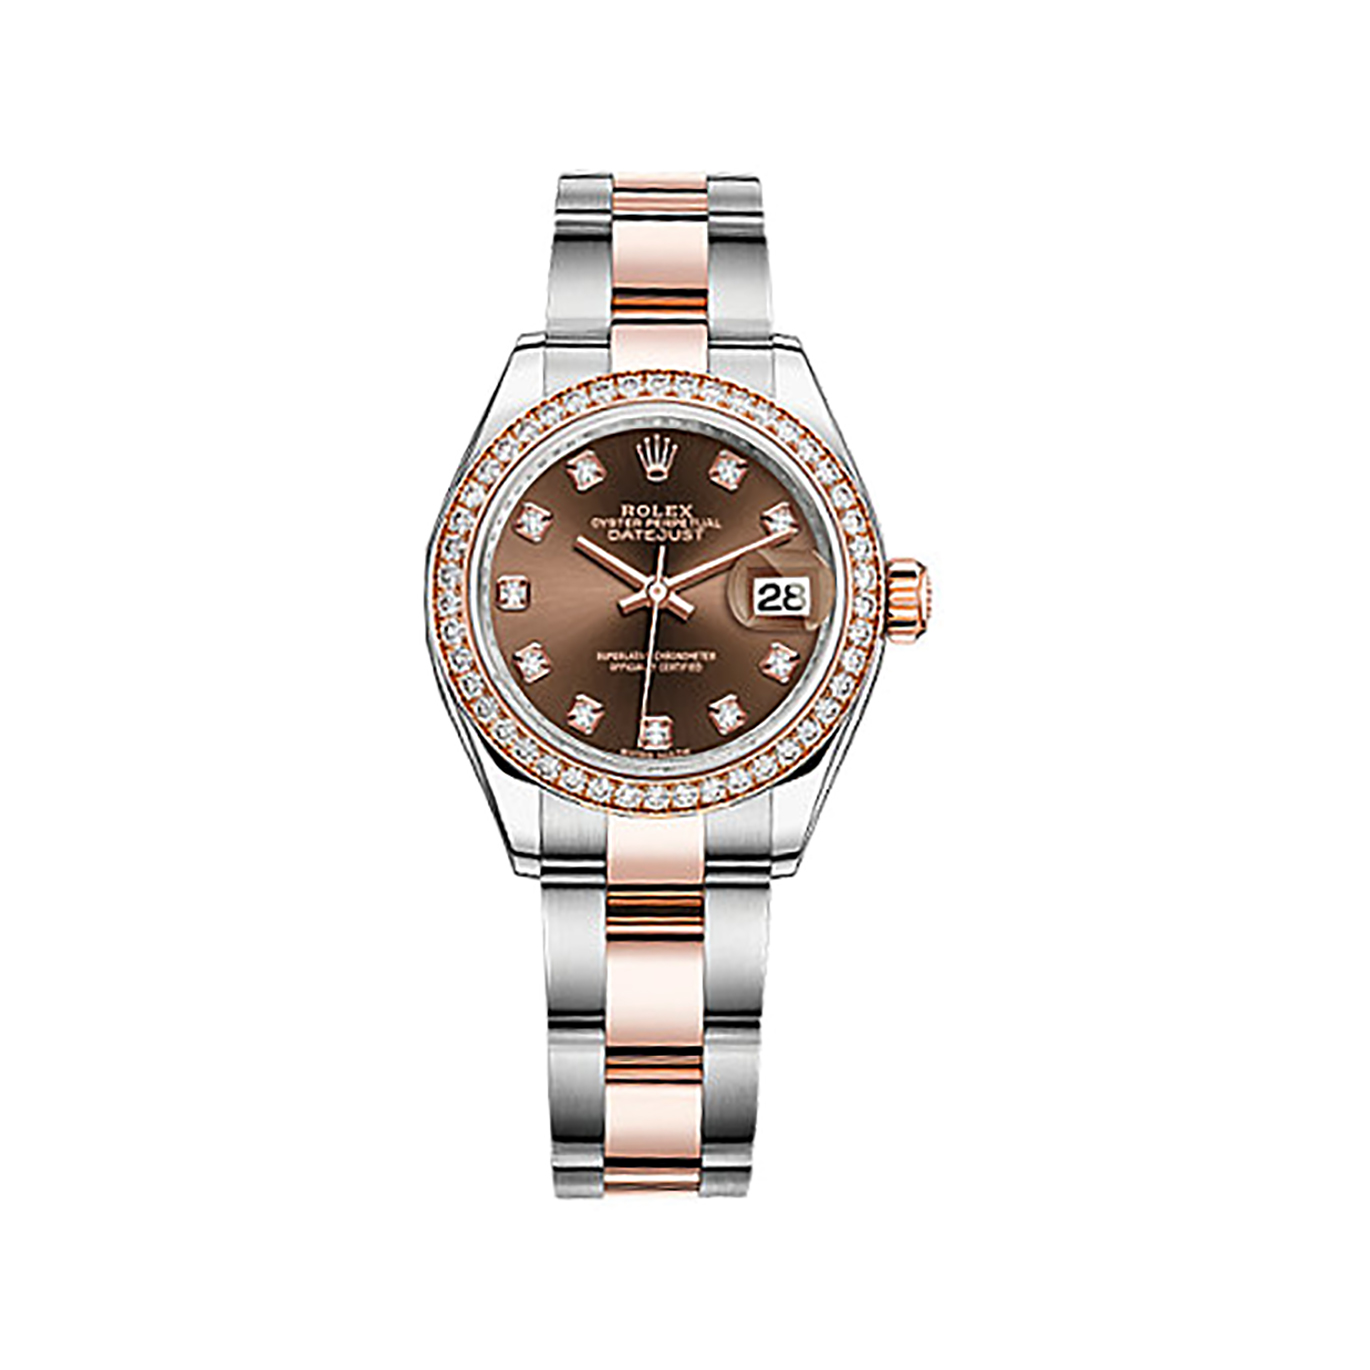 Lady-Datejust 28 279381RBR Rose Gold & Stainless Steel & Diamonds Watch (Chocolate Set with Diamonds)